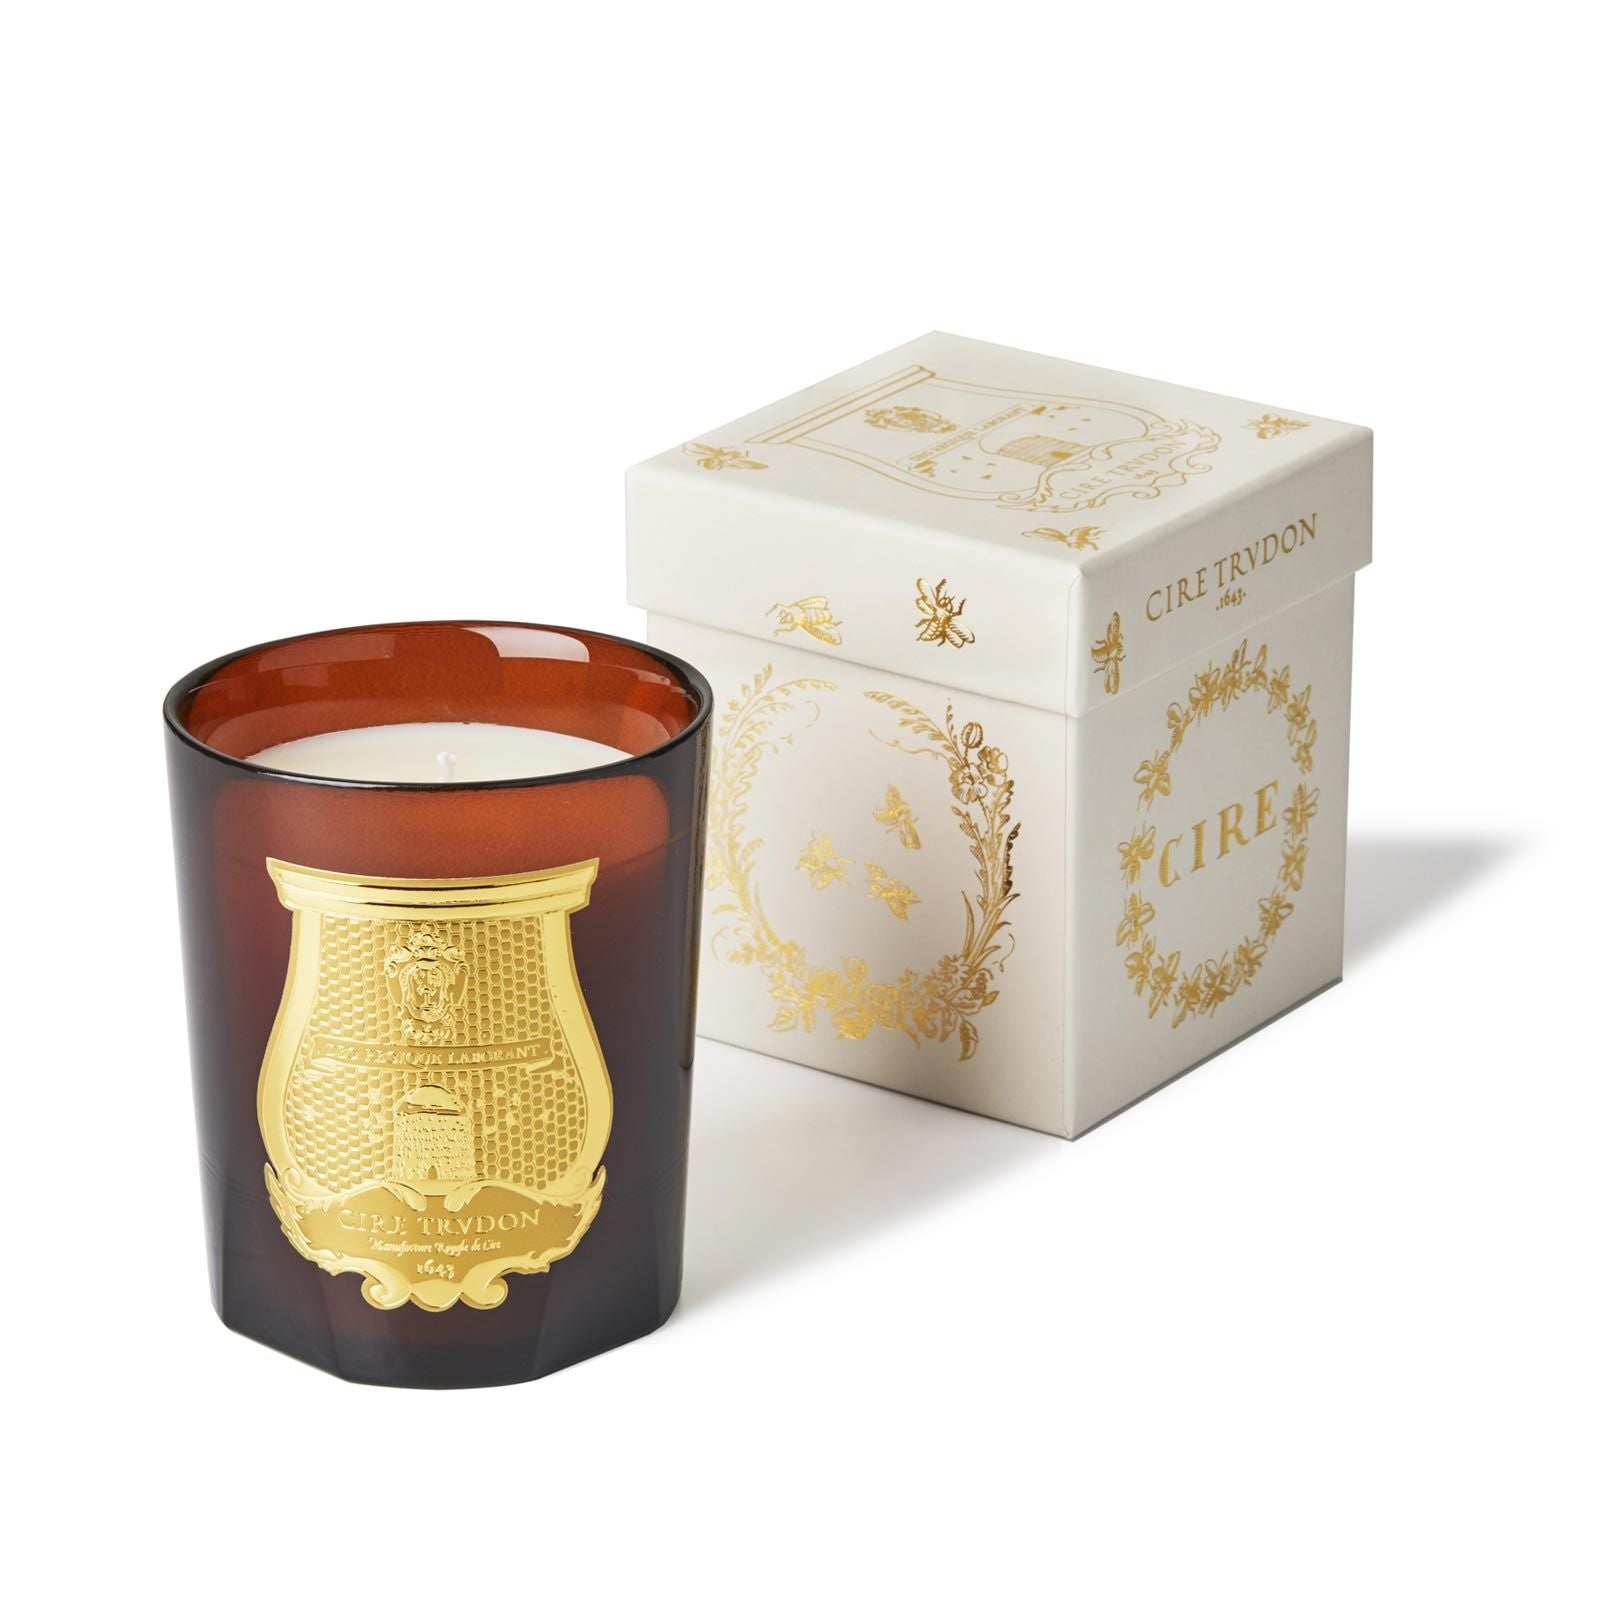 Trudon Classic (Beeswax Absolute) 270g